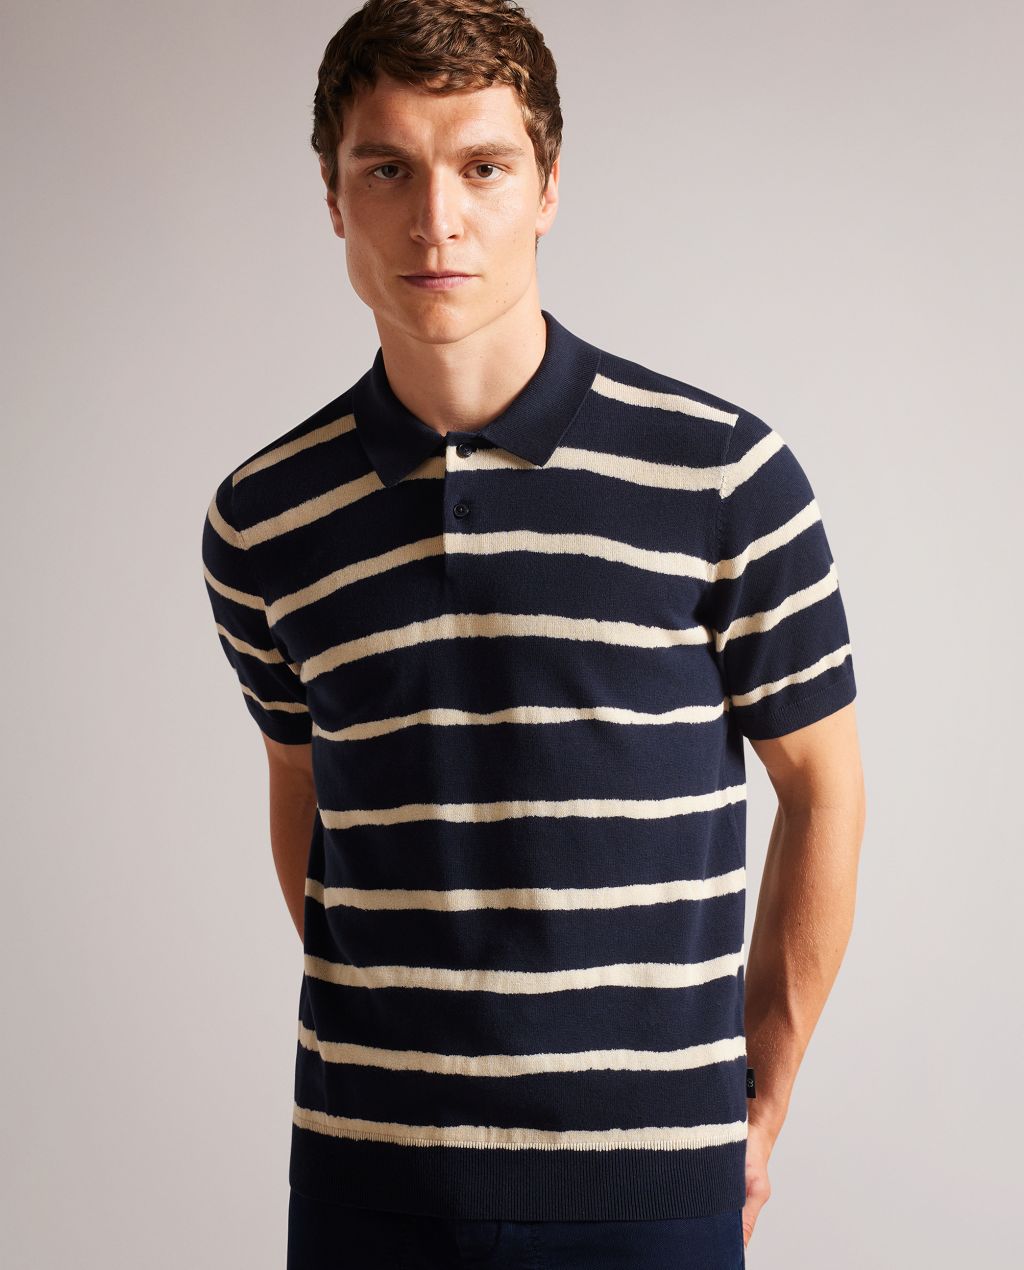 Ted Baker Men's Painted Stripe Knitted Polo Shirt in Navy, Cromer, Cotton